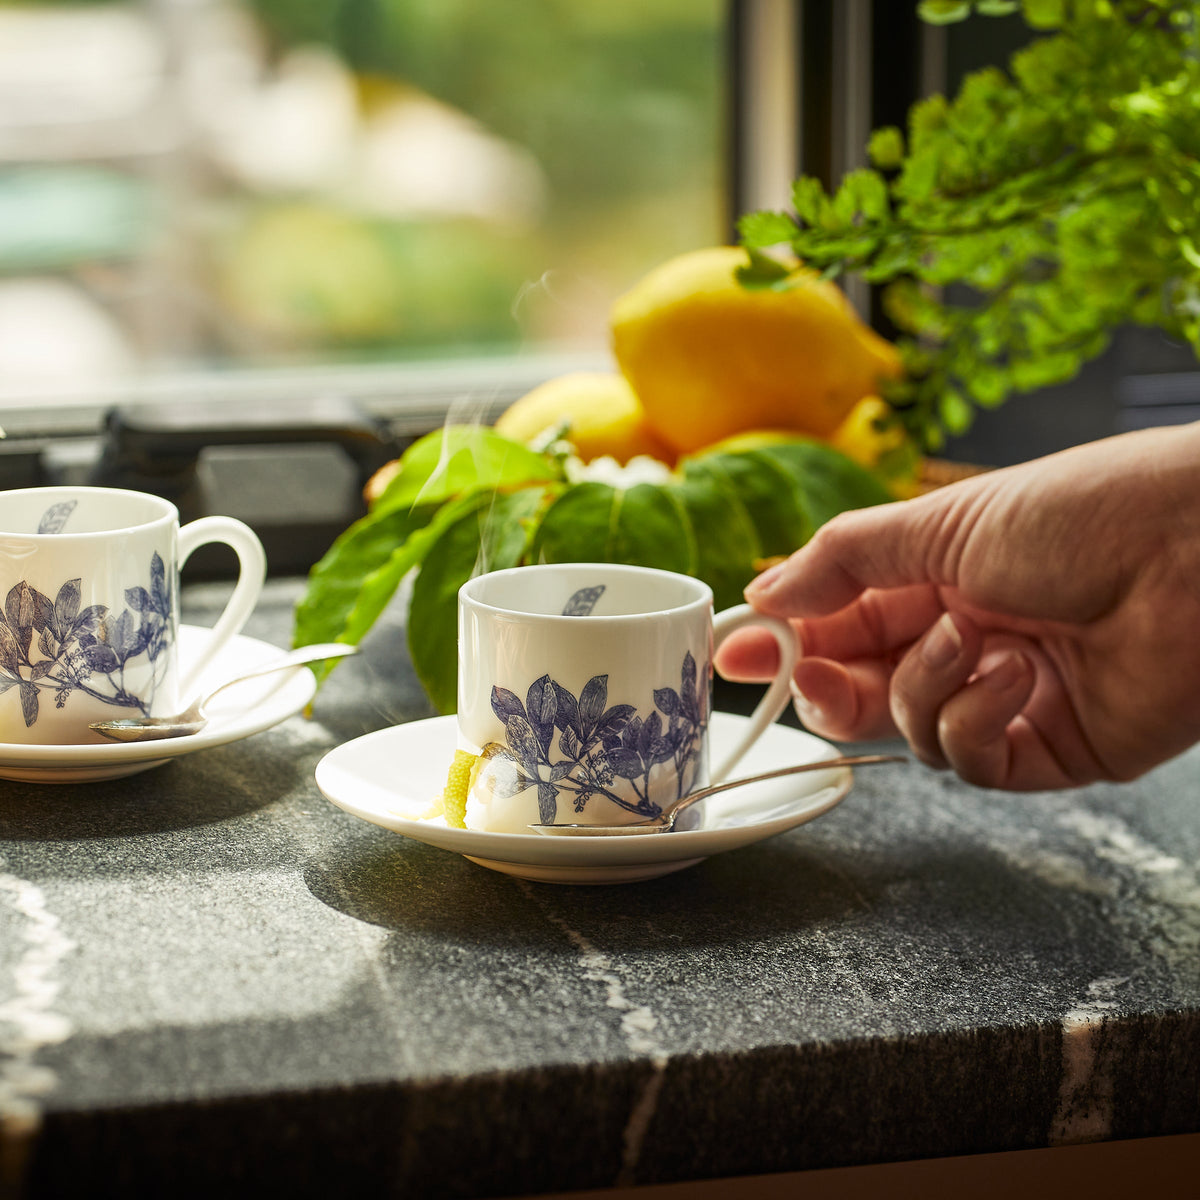 A hand reaching for a teacup with a saucer and spoon, beside another cup on a countertop. Two lemons and a green plant are in the background near a window, highlighting the elegance of Arbor Espresso Cups &amp; Saucers, Set of 2 by Caskata.